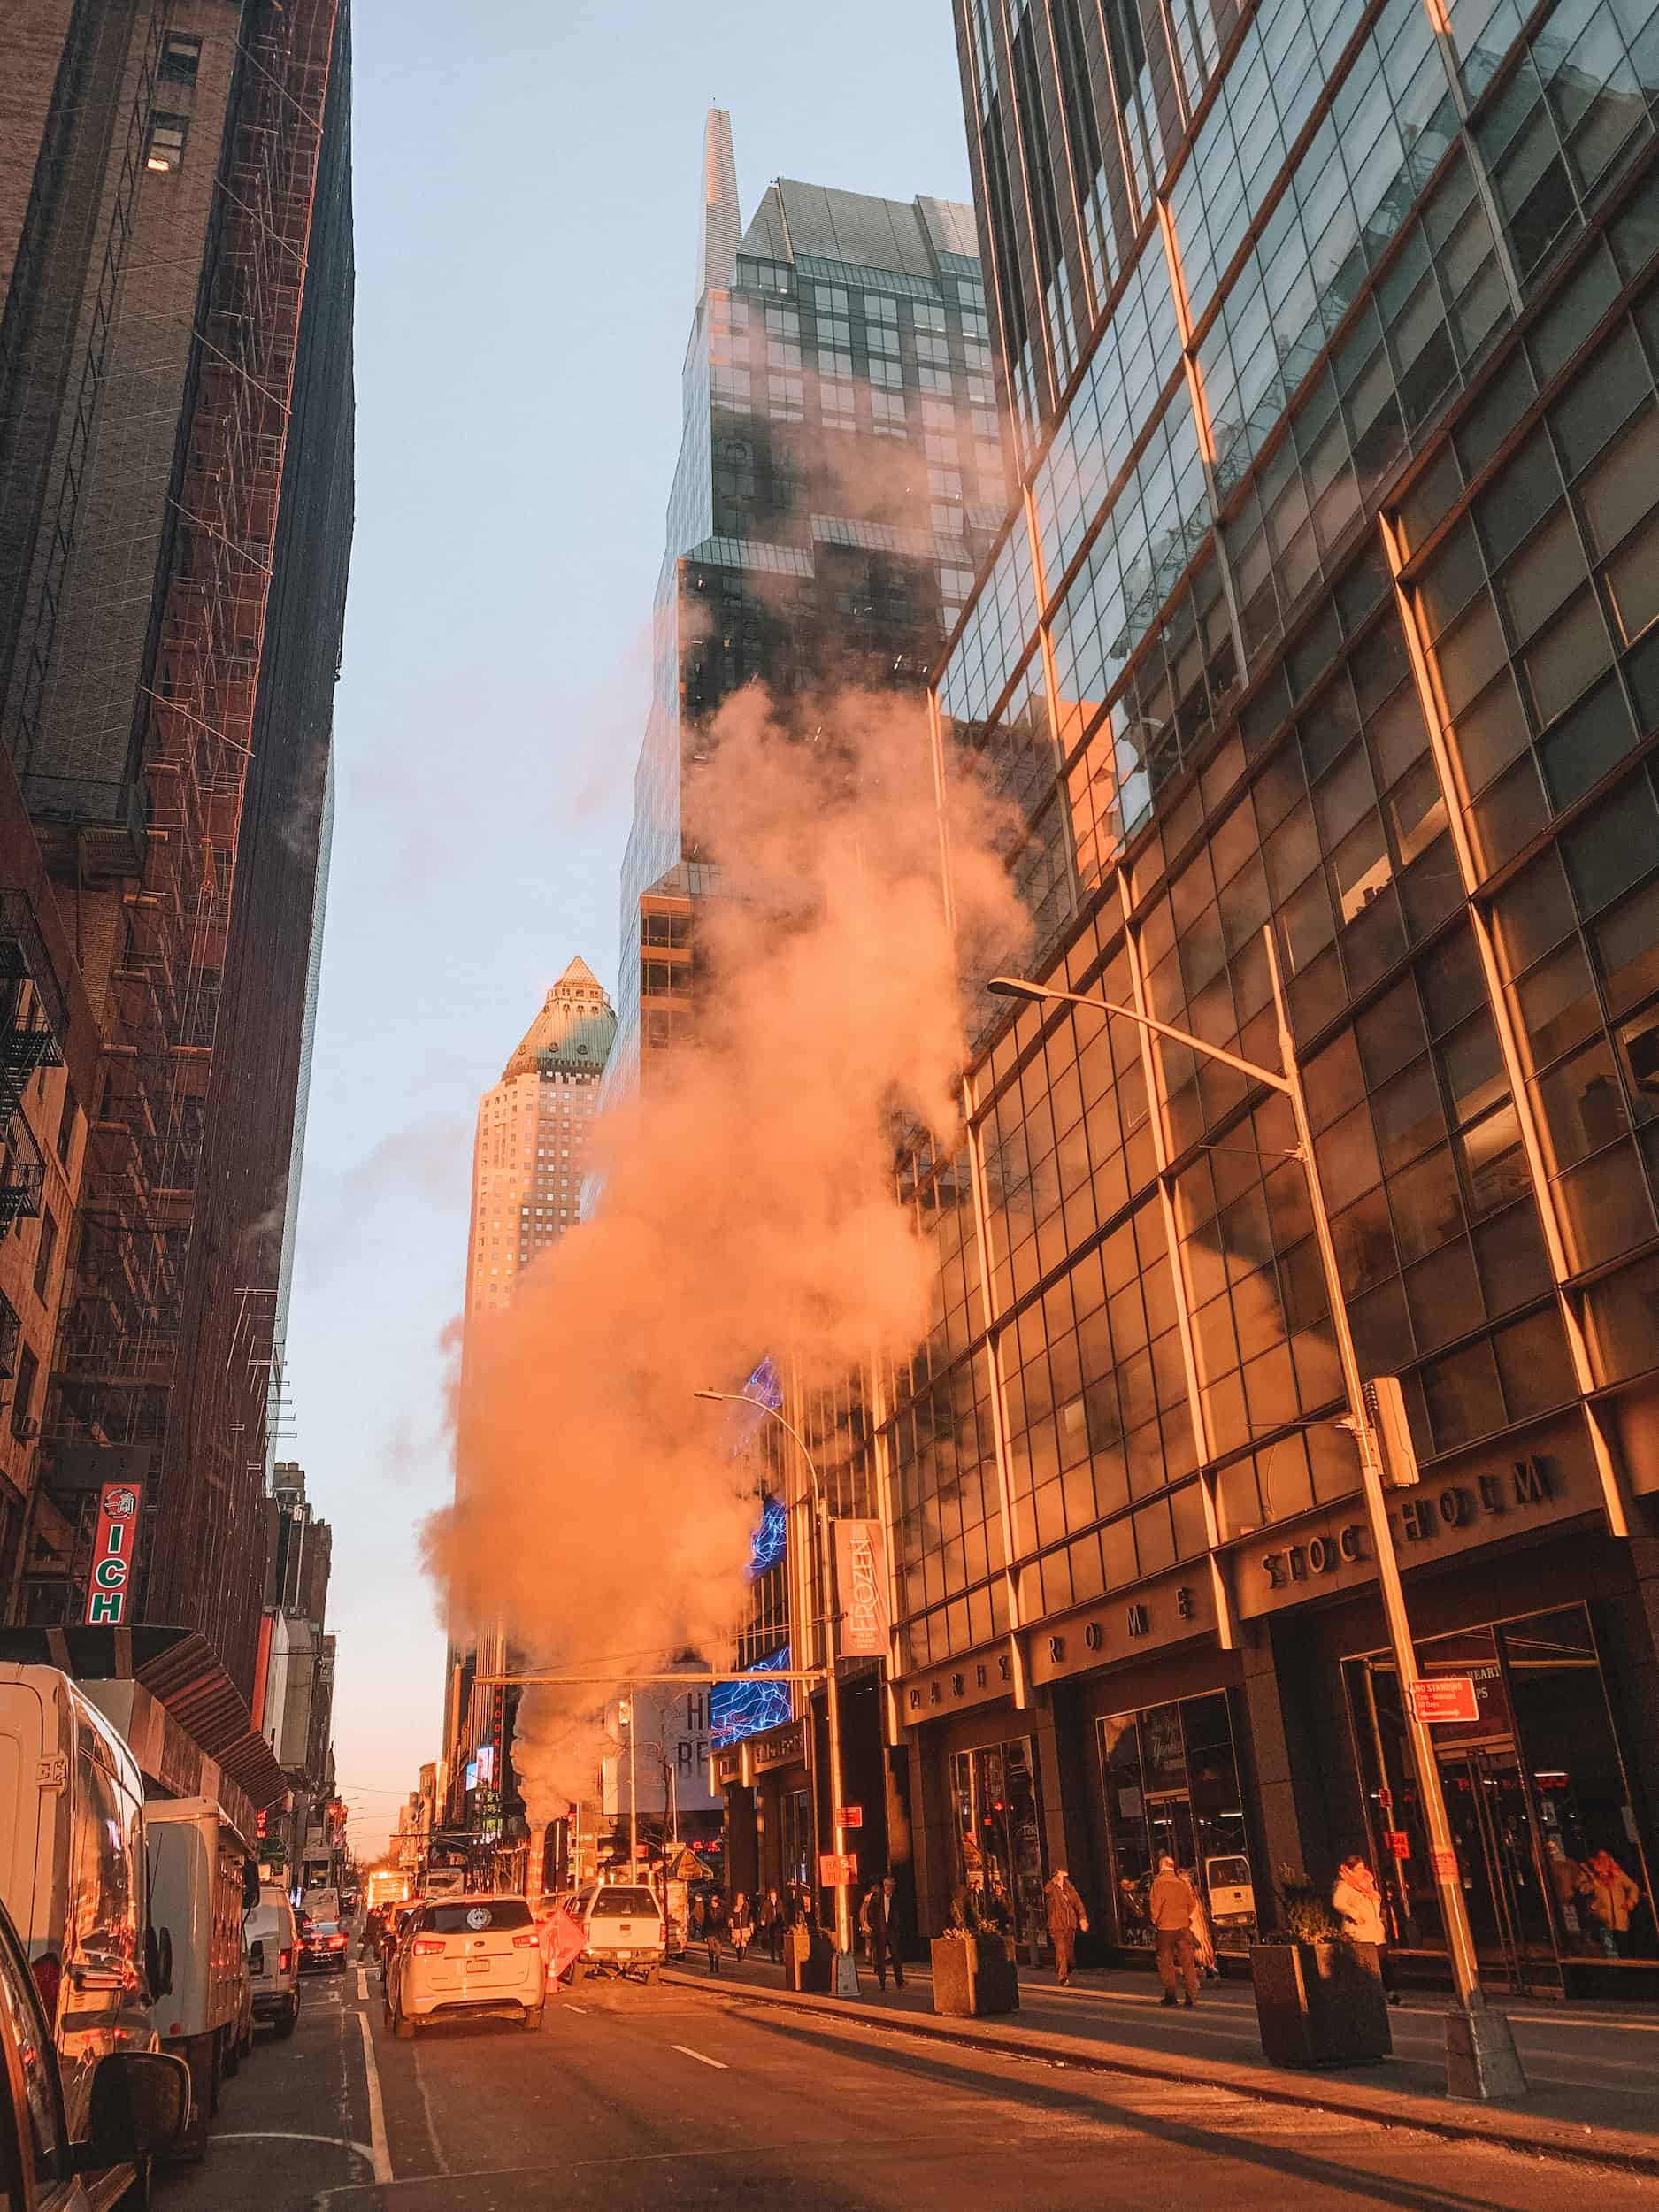 A two lane street in New York City glowing as the sun is coming up. A large amount of steam is coming up from the subway